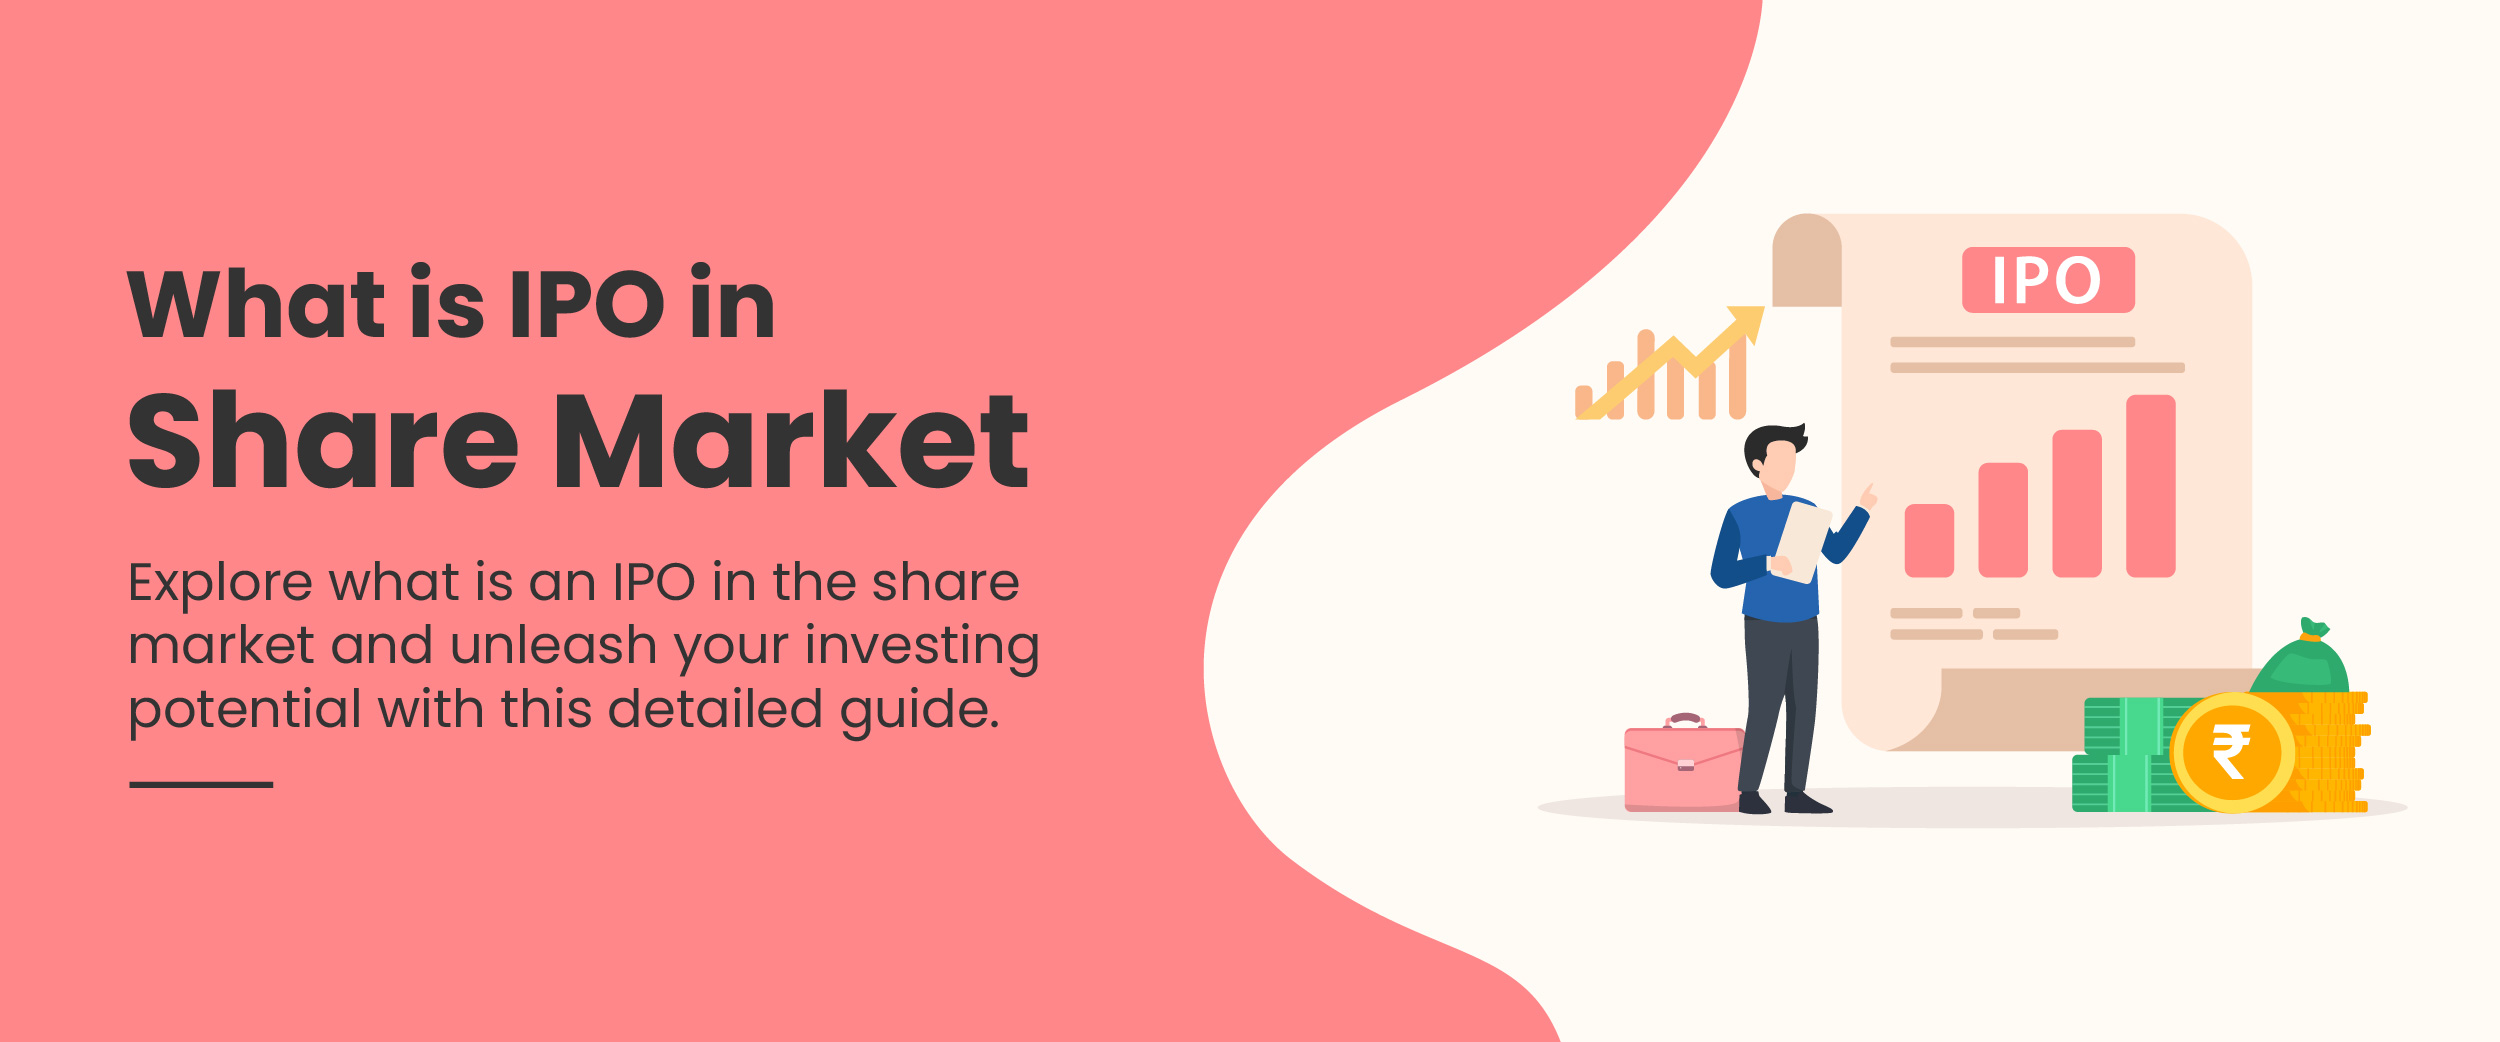 What is IPO in Share Market